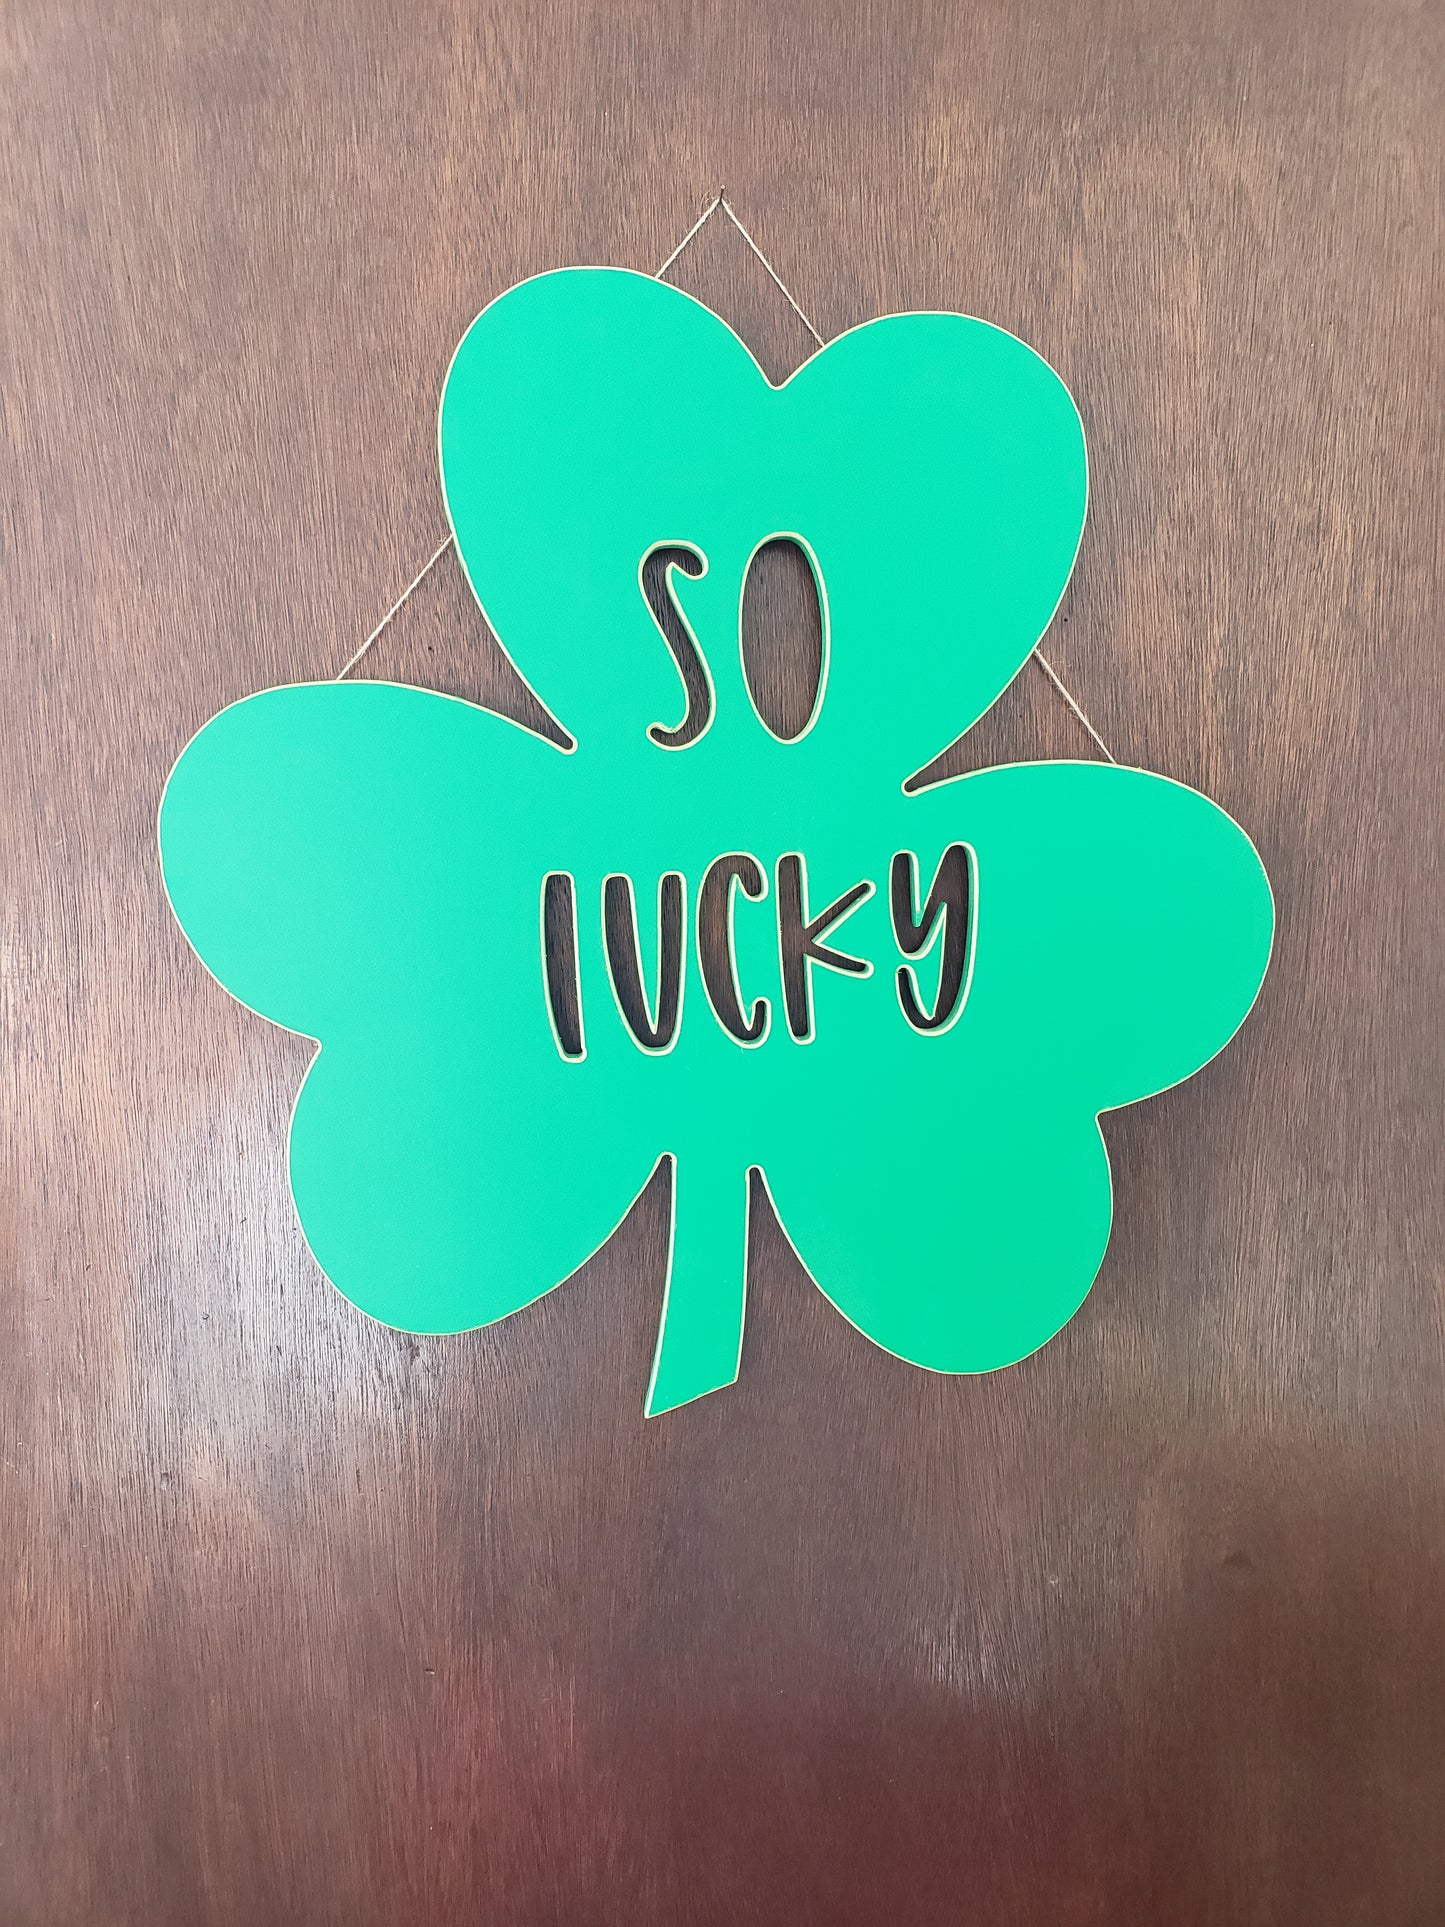 Emerald 'So Lucky' Shamrock Door Sign – Festive Irish Decor for St. Patrick's Day and All Year Round